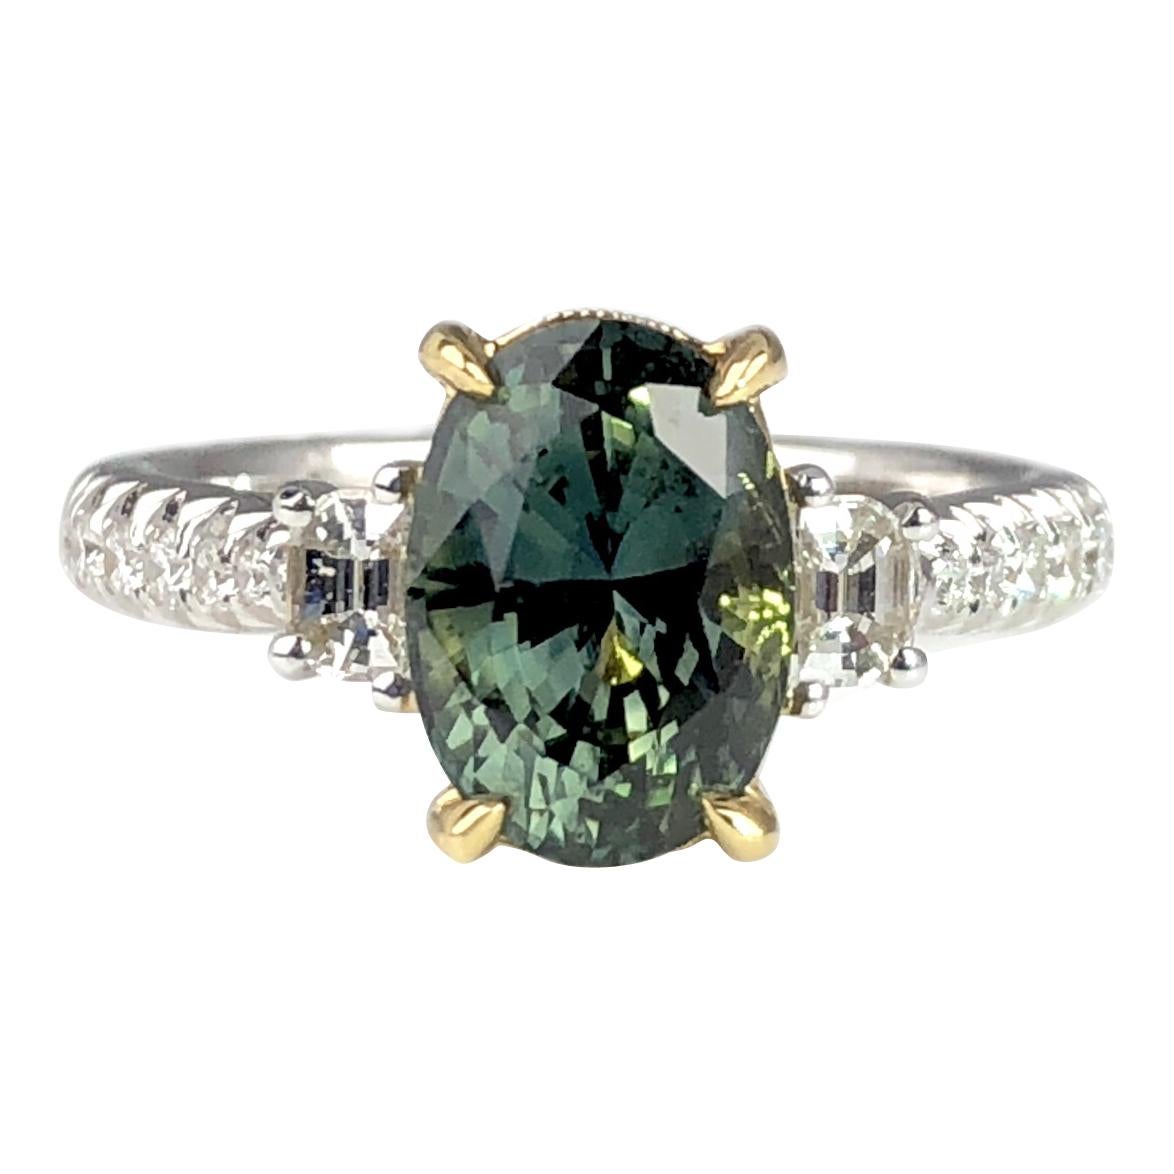 2.90 Carat Oval Cut Exotic Forest Green Sapphire and 0.57 Carat Diamond Ring